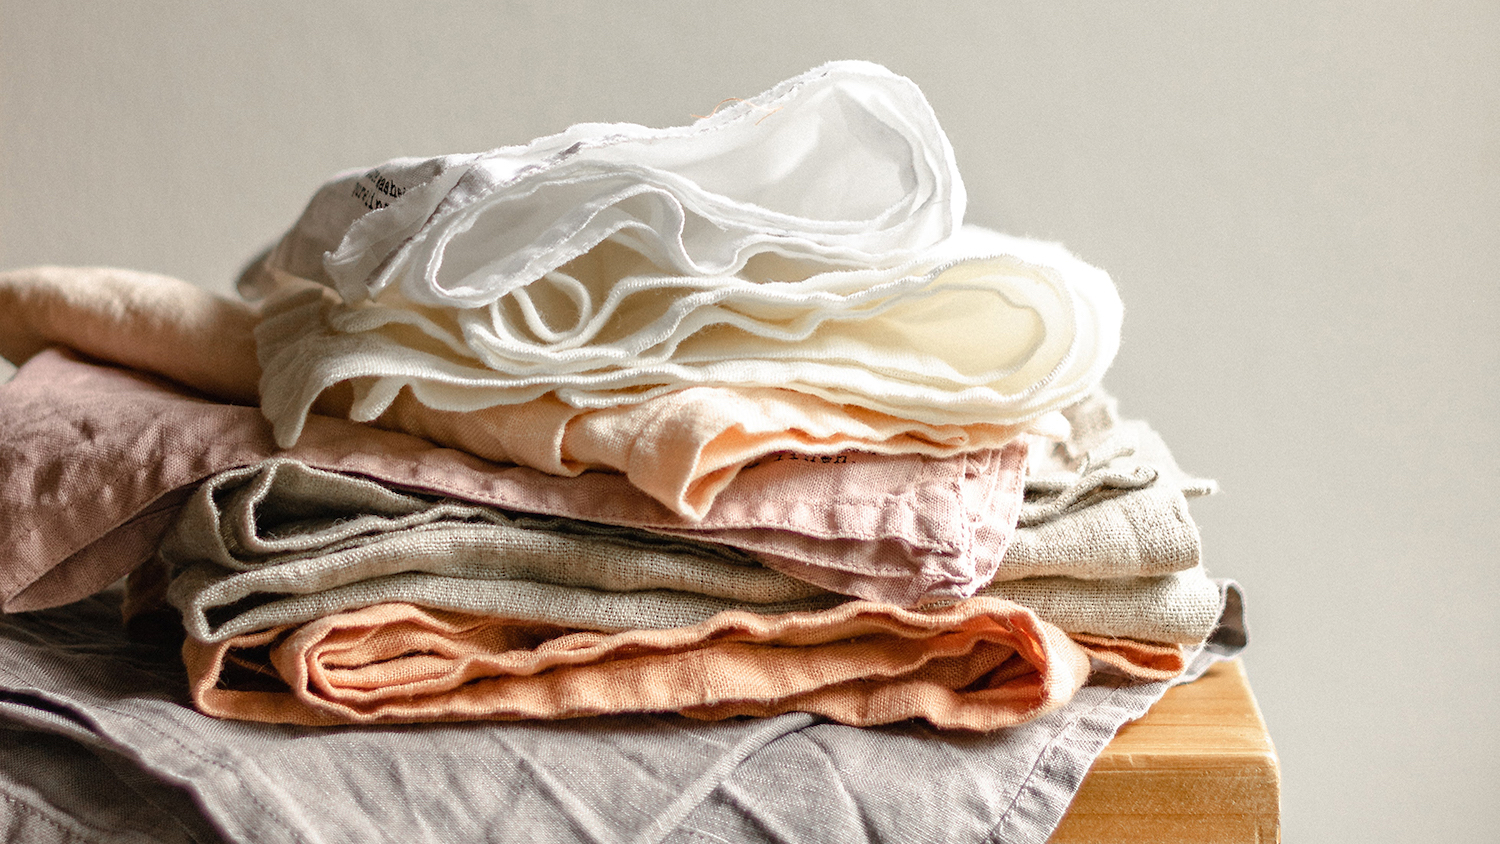 Linen napkins - Why Some Fabrics Shed More Microfibers Than Others - College of Natural Resources News - NC State University